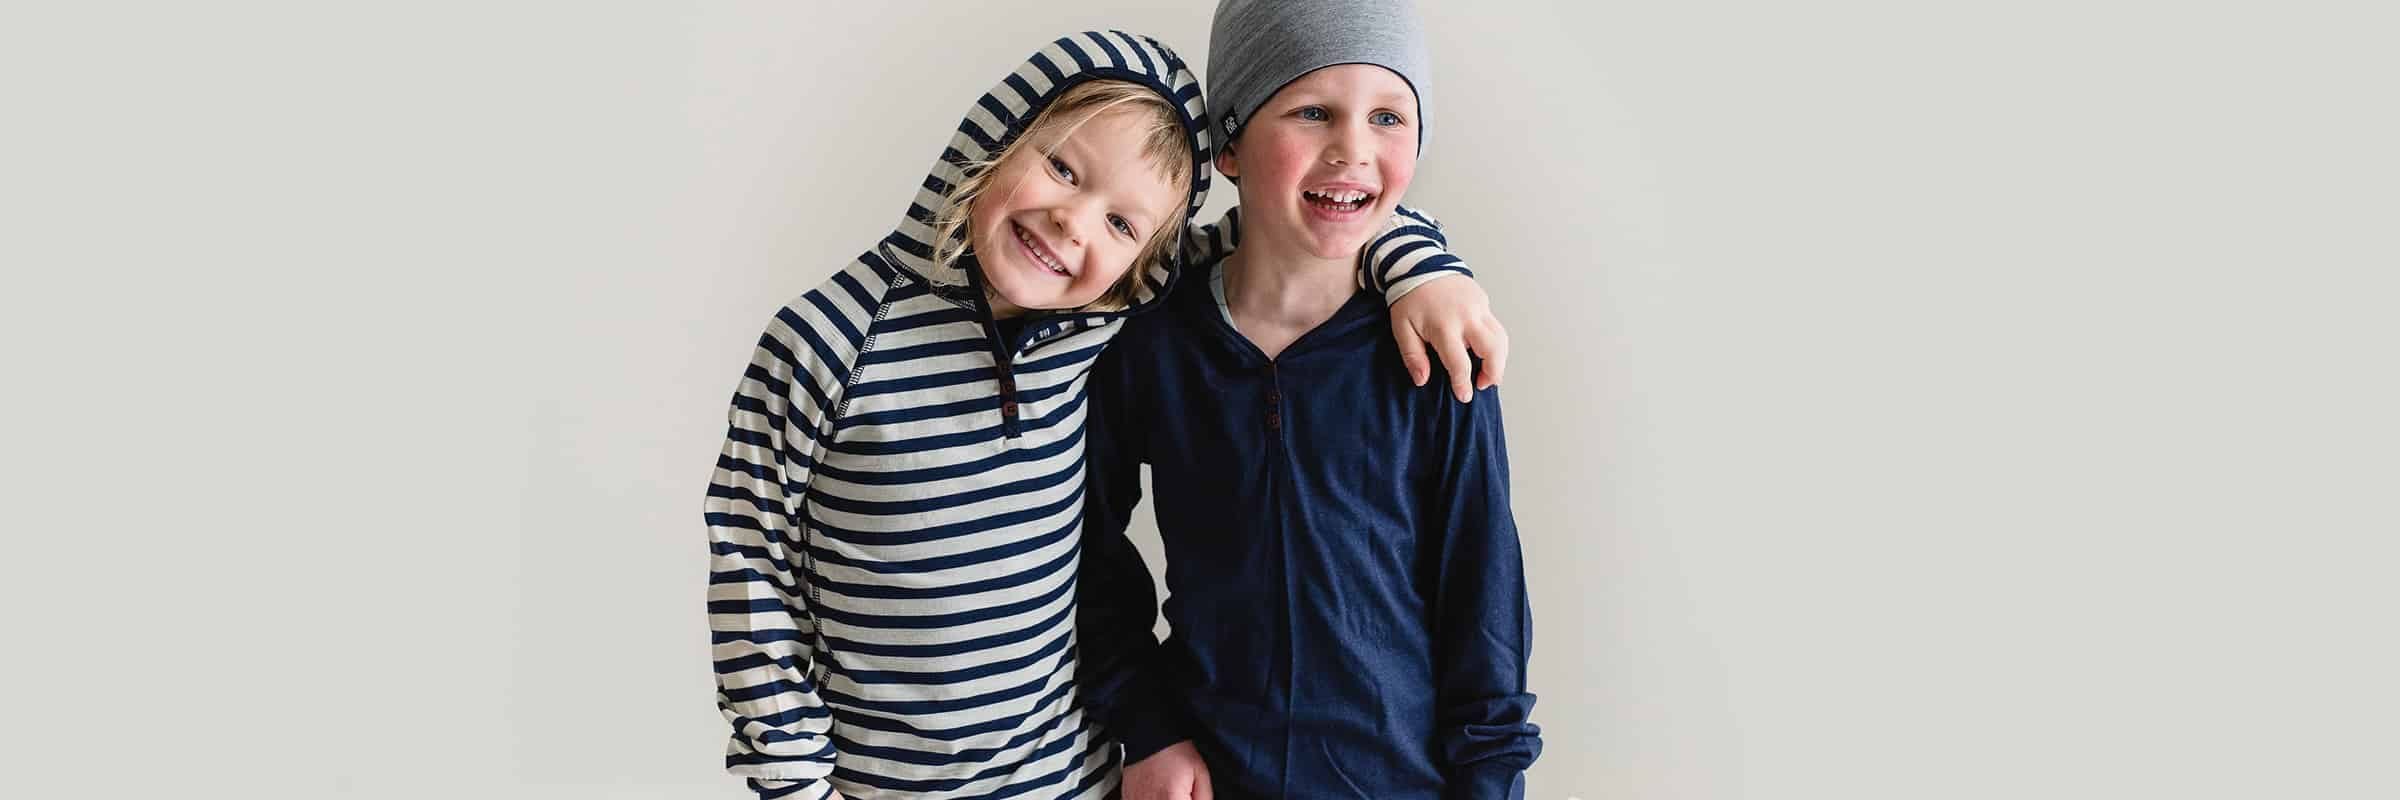 Adorable Canadian Brands for Your Kids